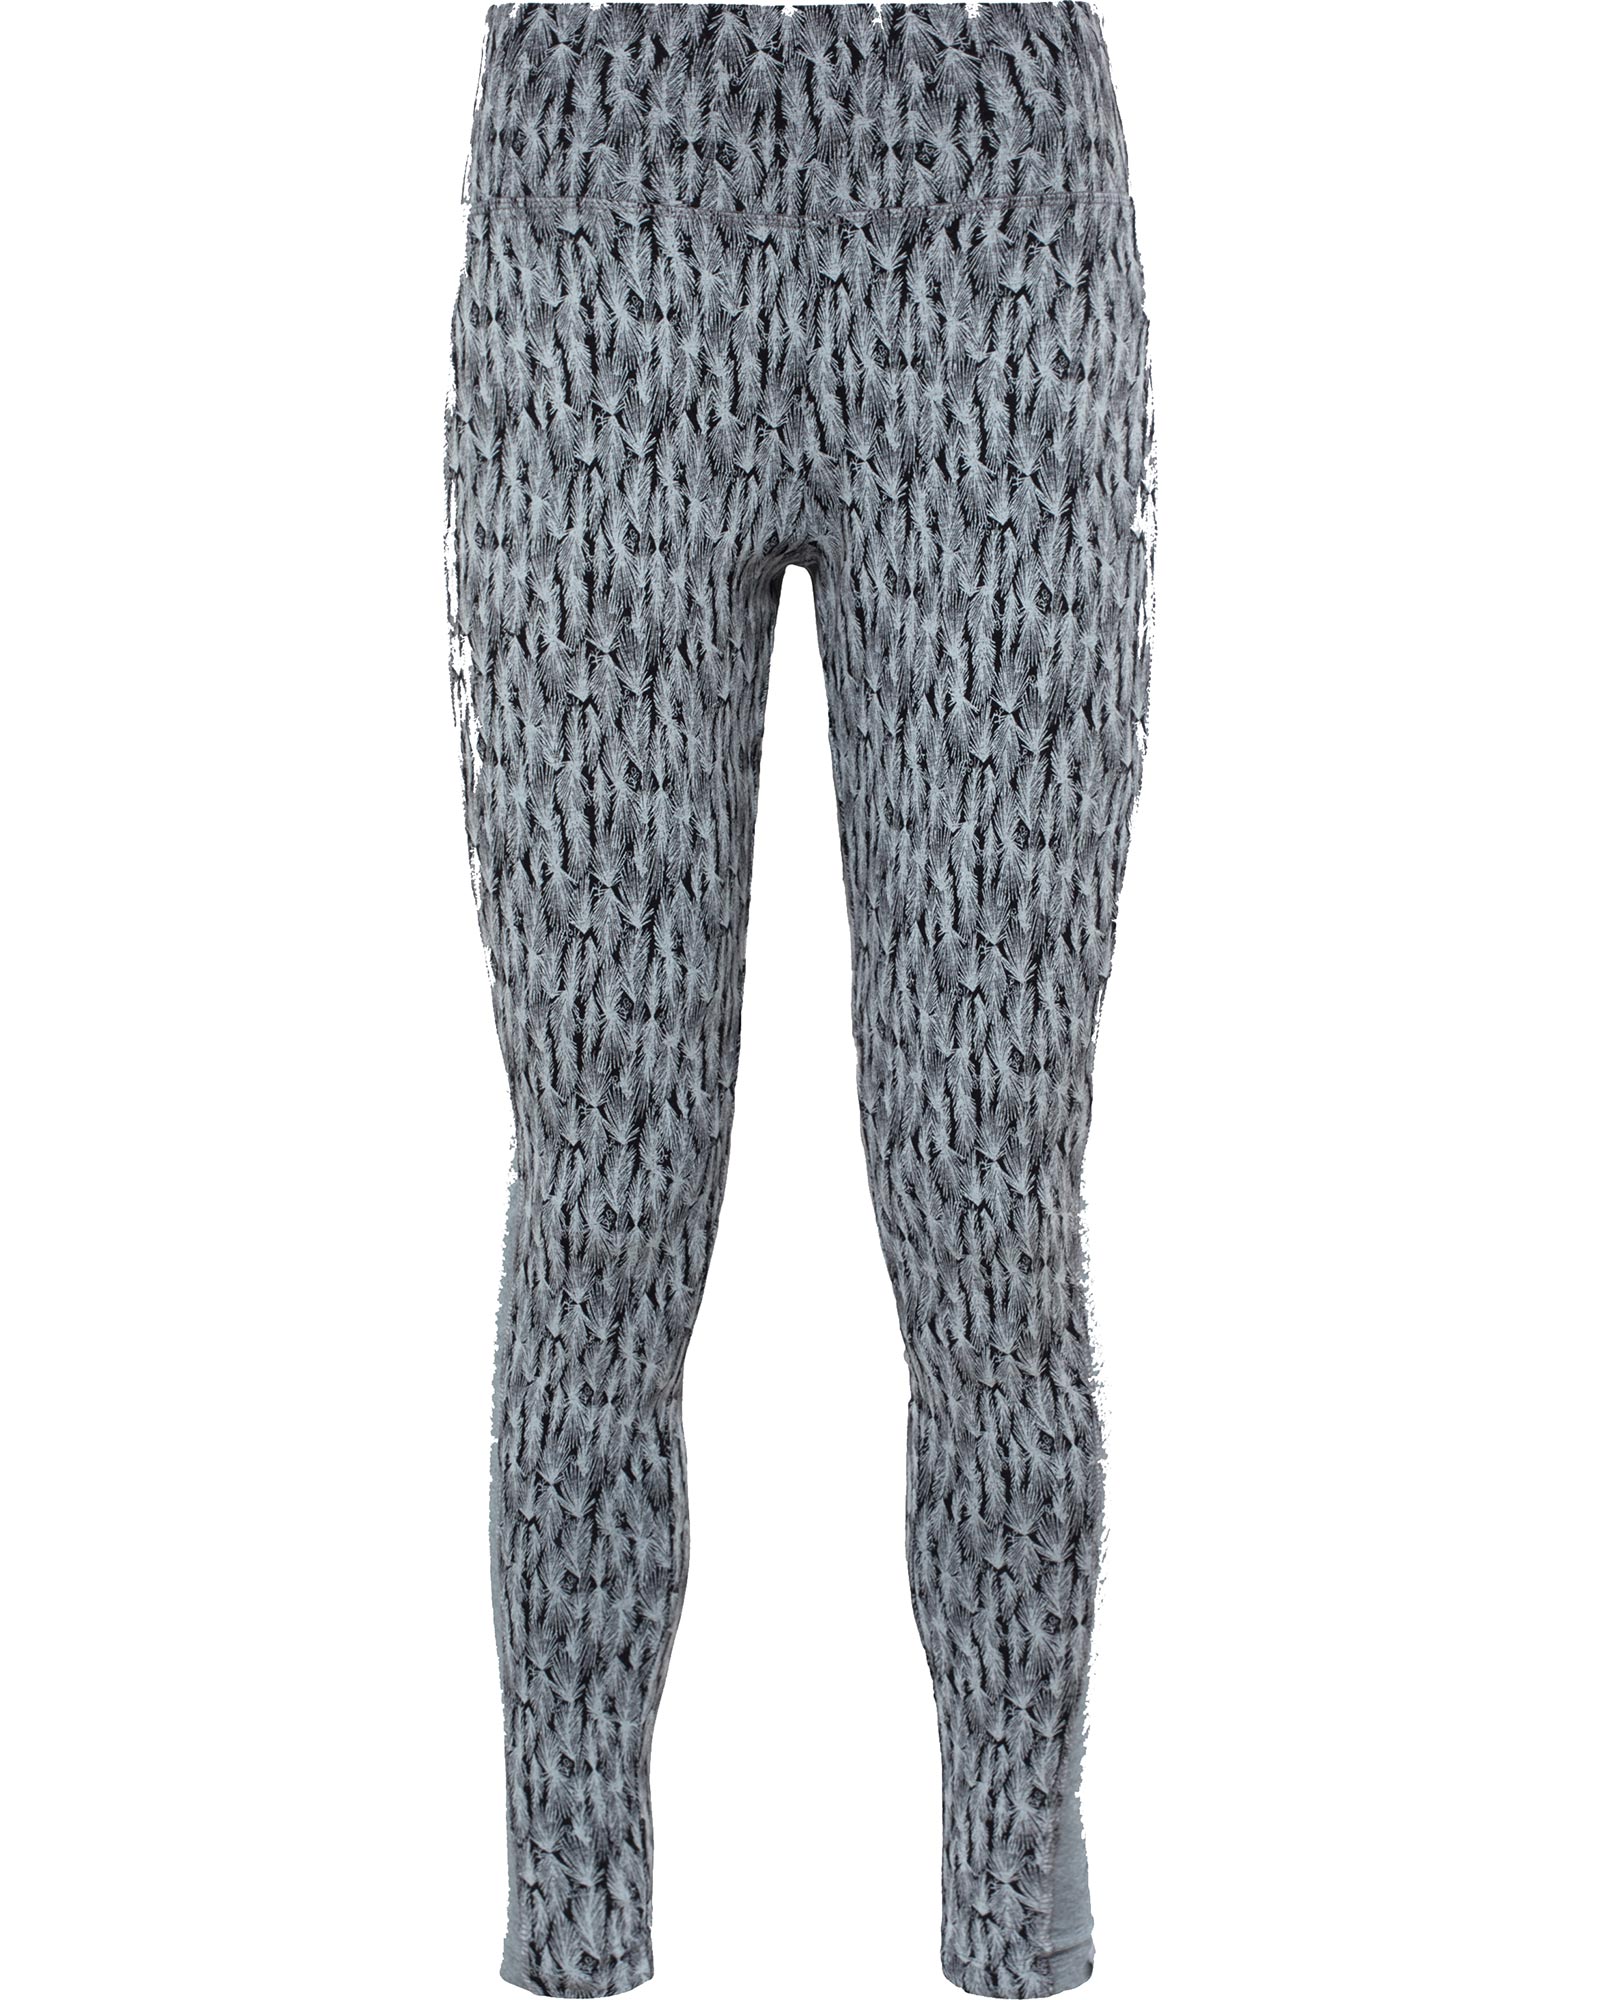 The North Face NSE Women’s Leggings - High Rise Grey Print XS